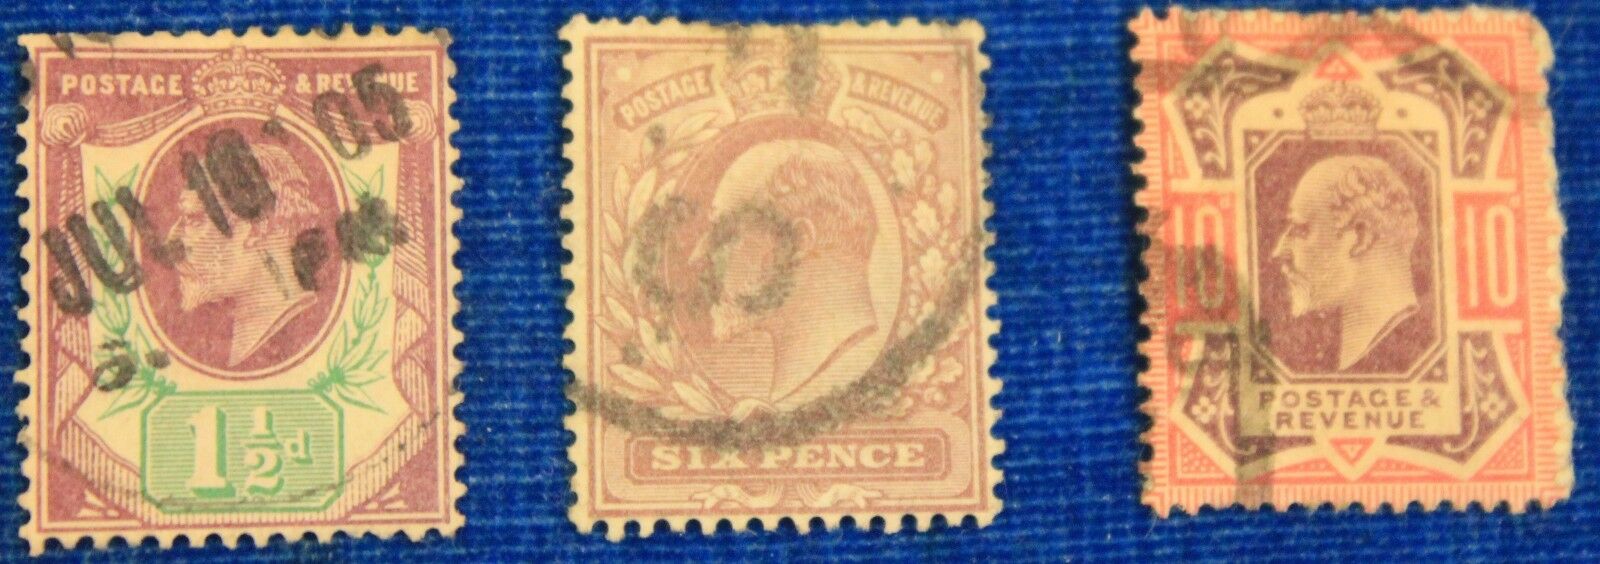 GREAT BRITAIN 3 USED KING EDWARD VII STAMPS SCOTT # 129, 135, 137